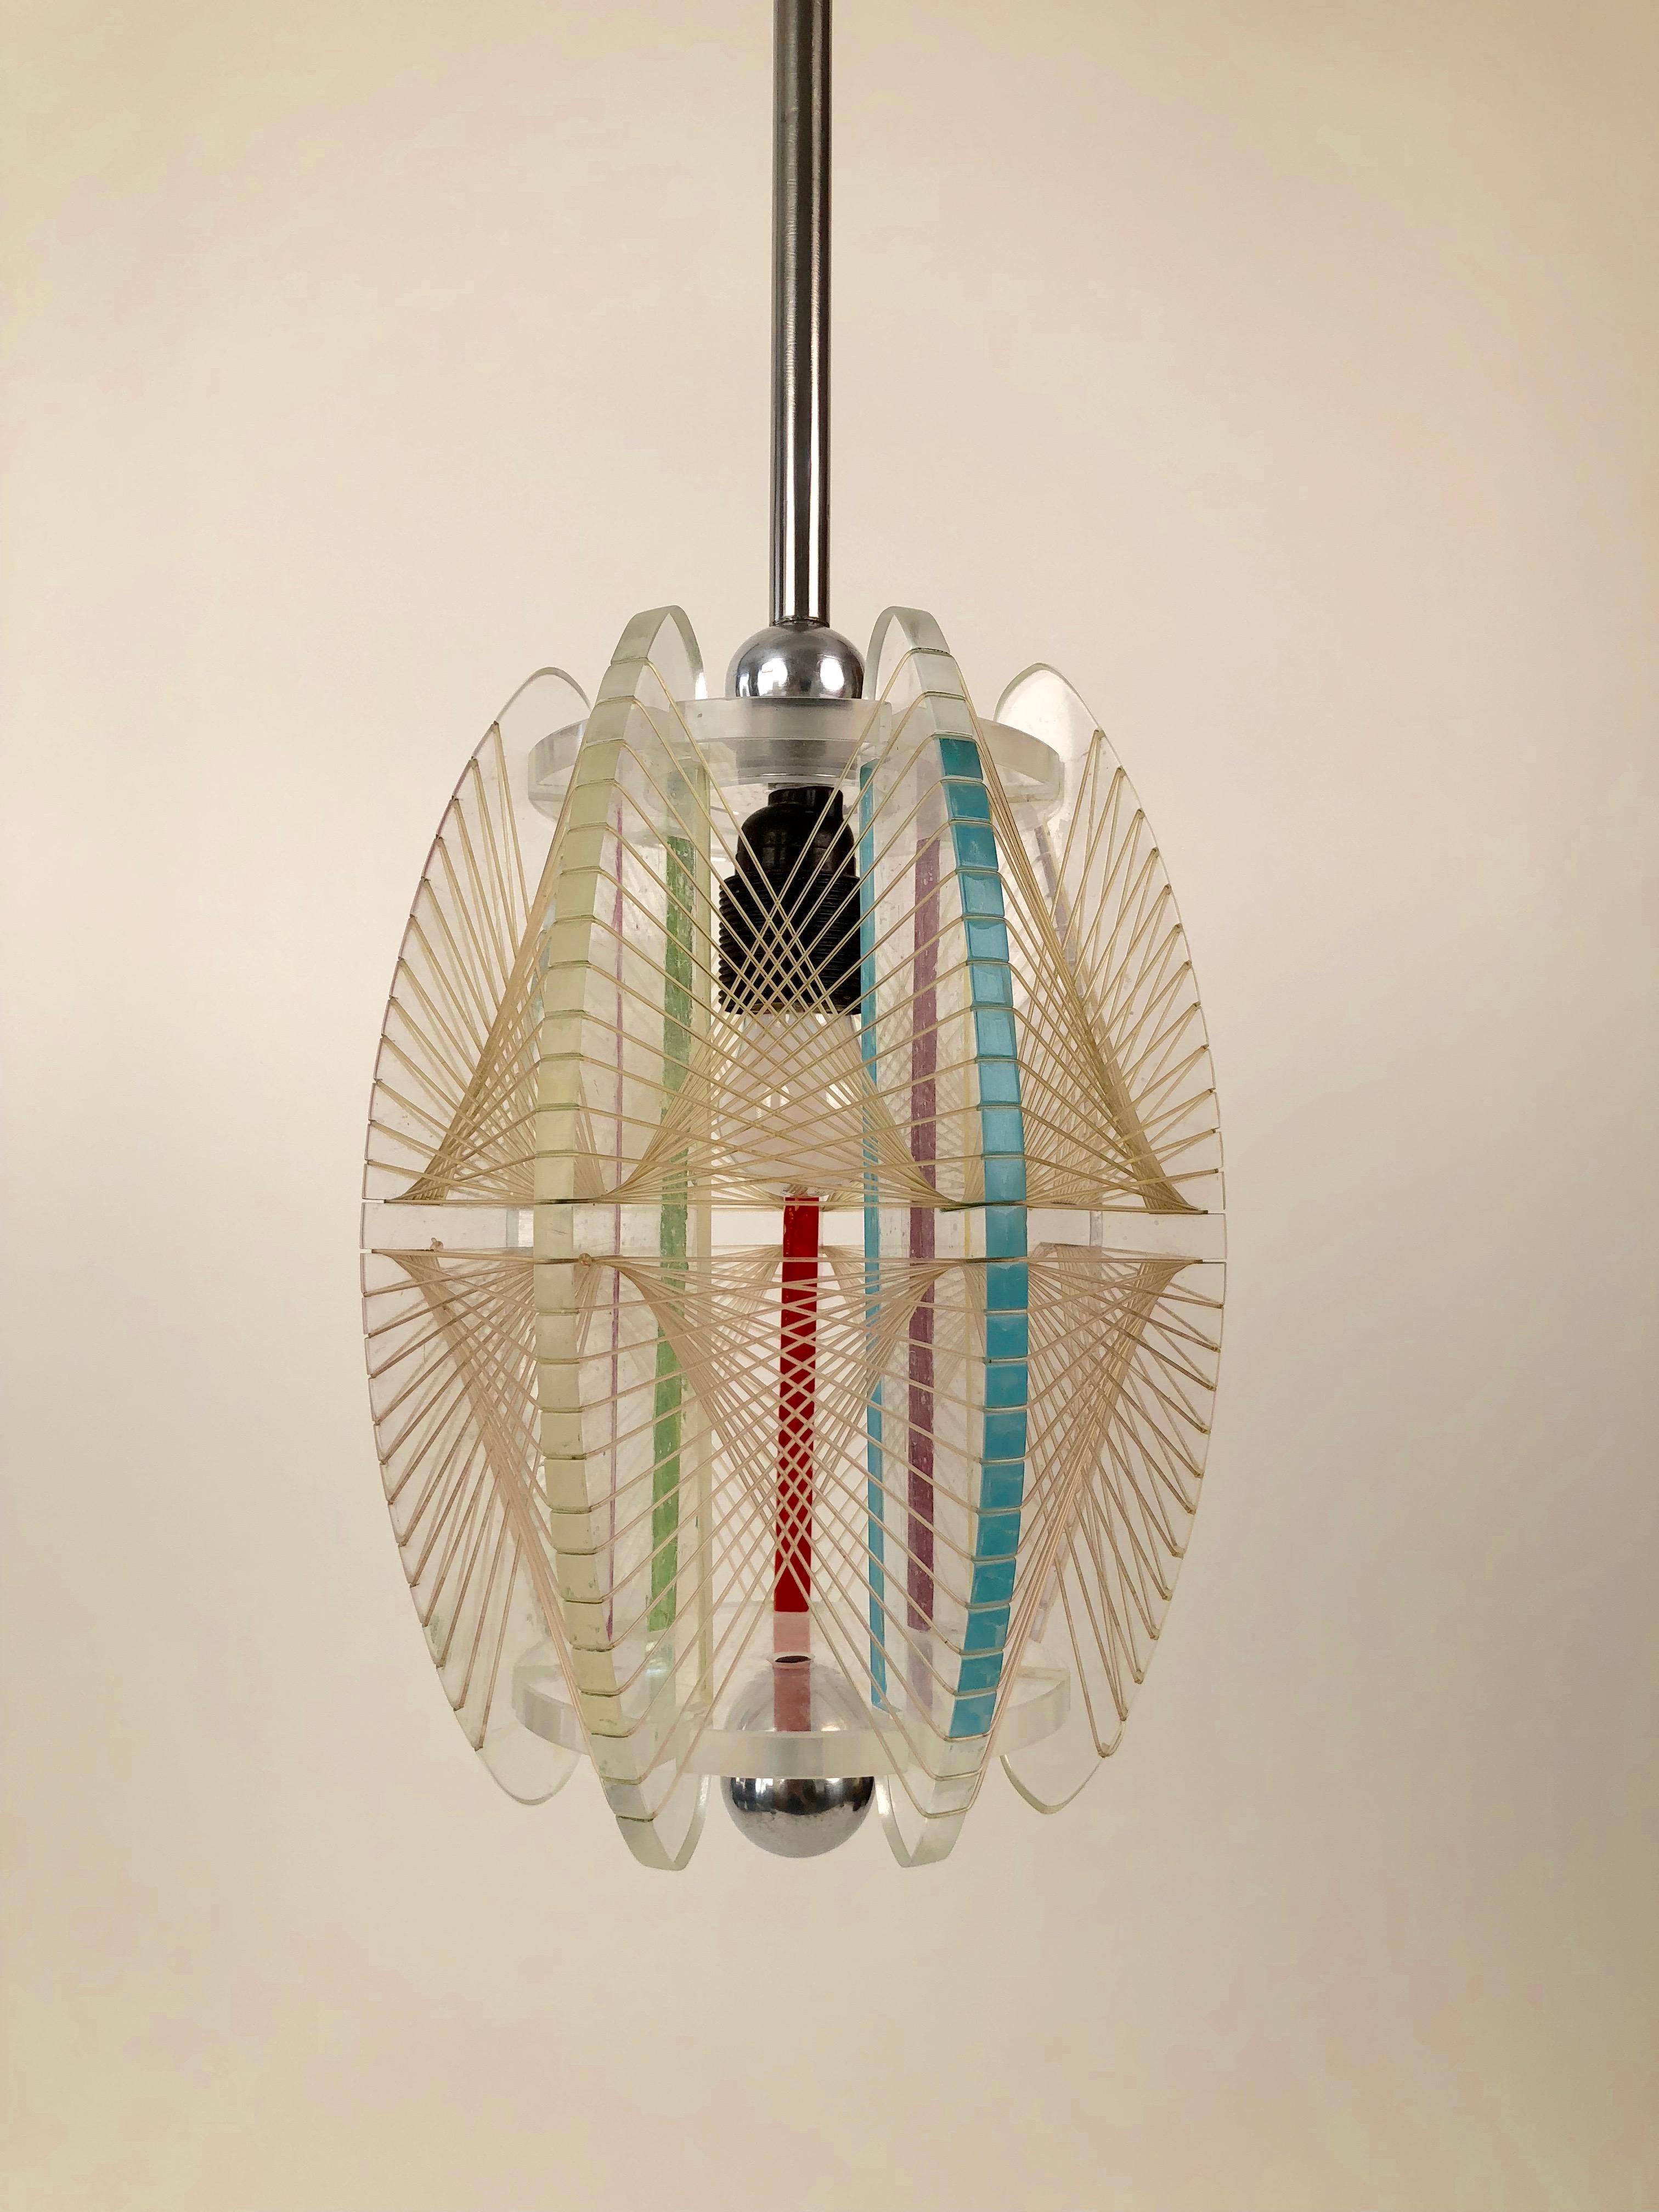 Midcentury Acrylic and Mono Filament Pendant with Color Accents, Czech Republic In Good Condition For Sale In Vienna, Austria